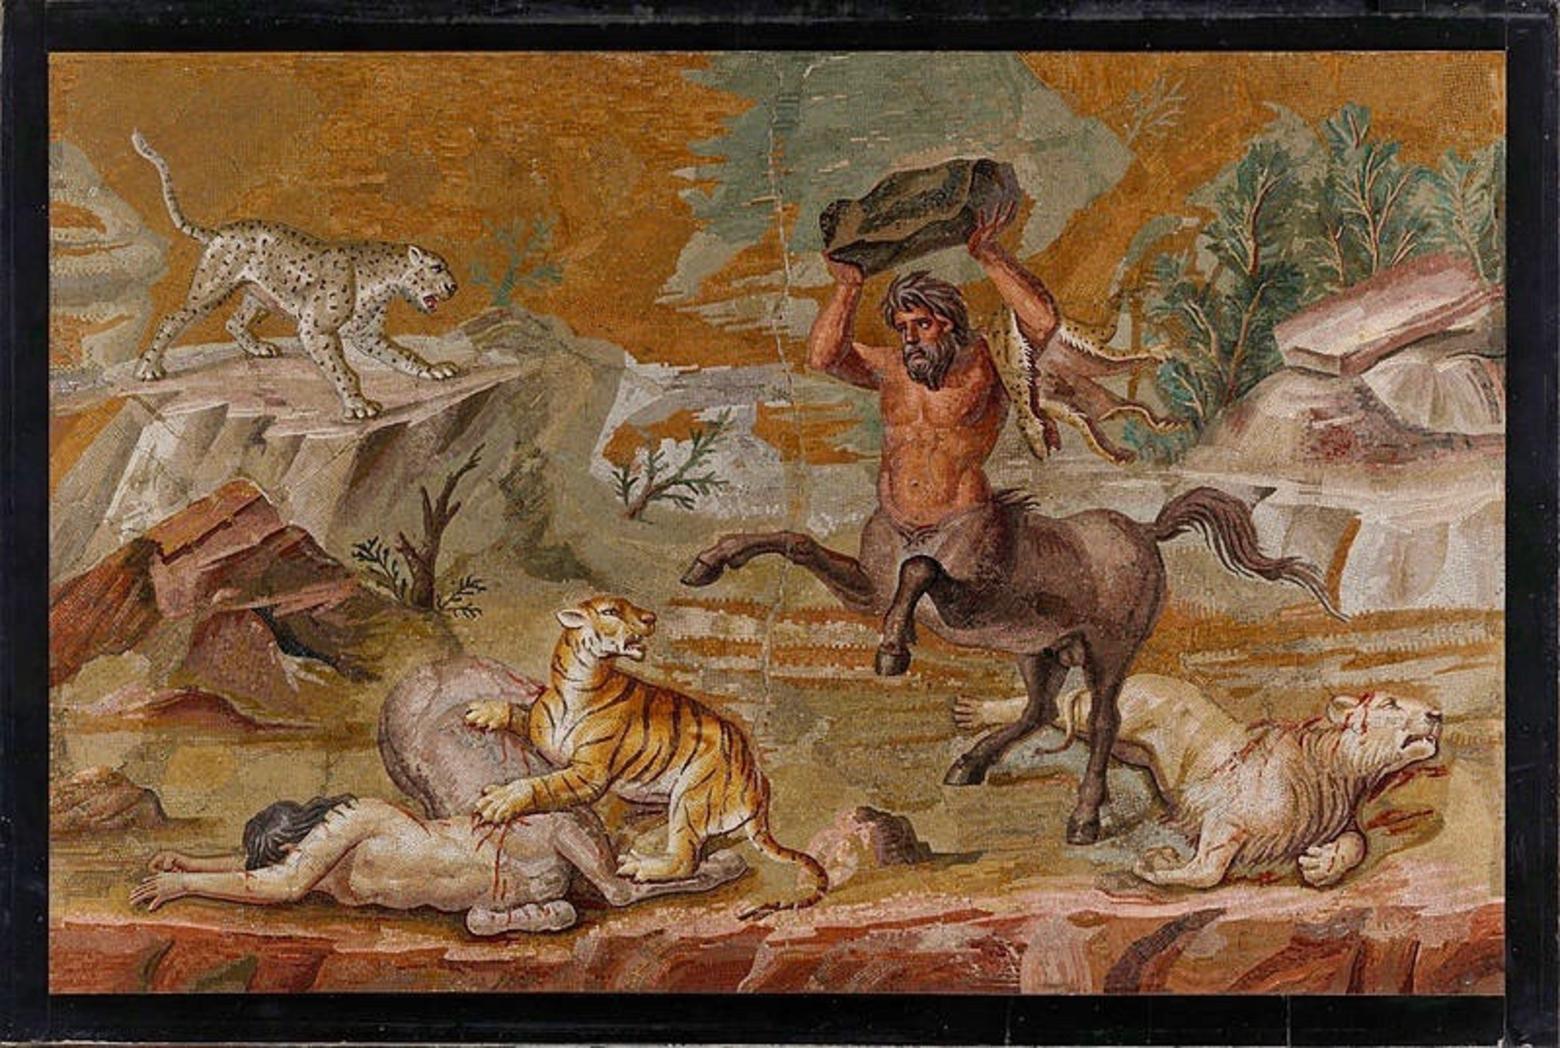 An ancient tiled mosaic portraying a centaur. Photo courtesy Wikipedia/Google Art Project